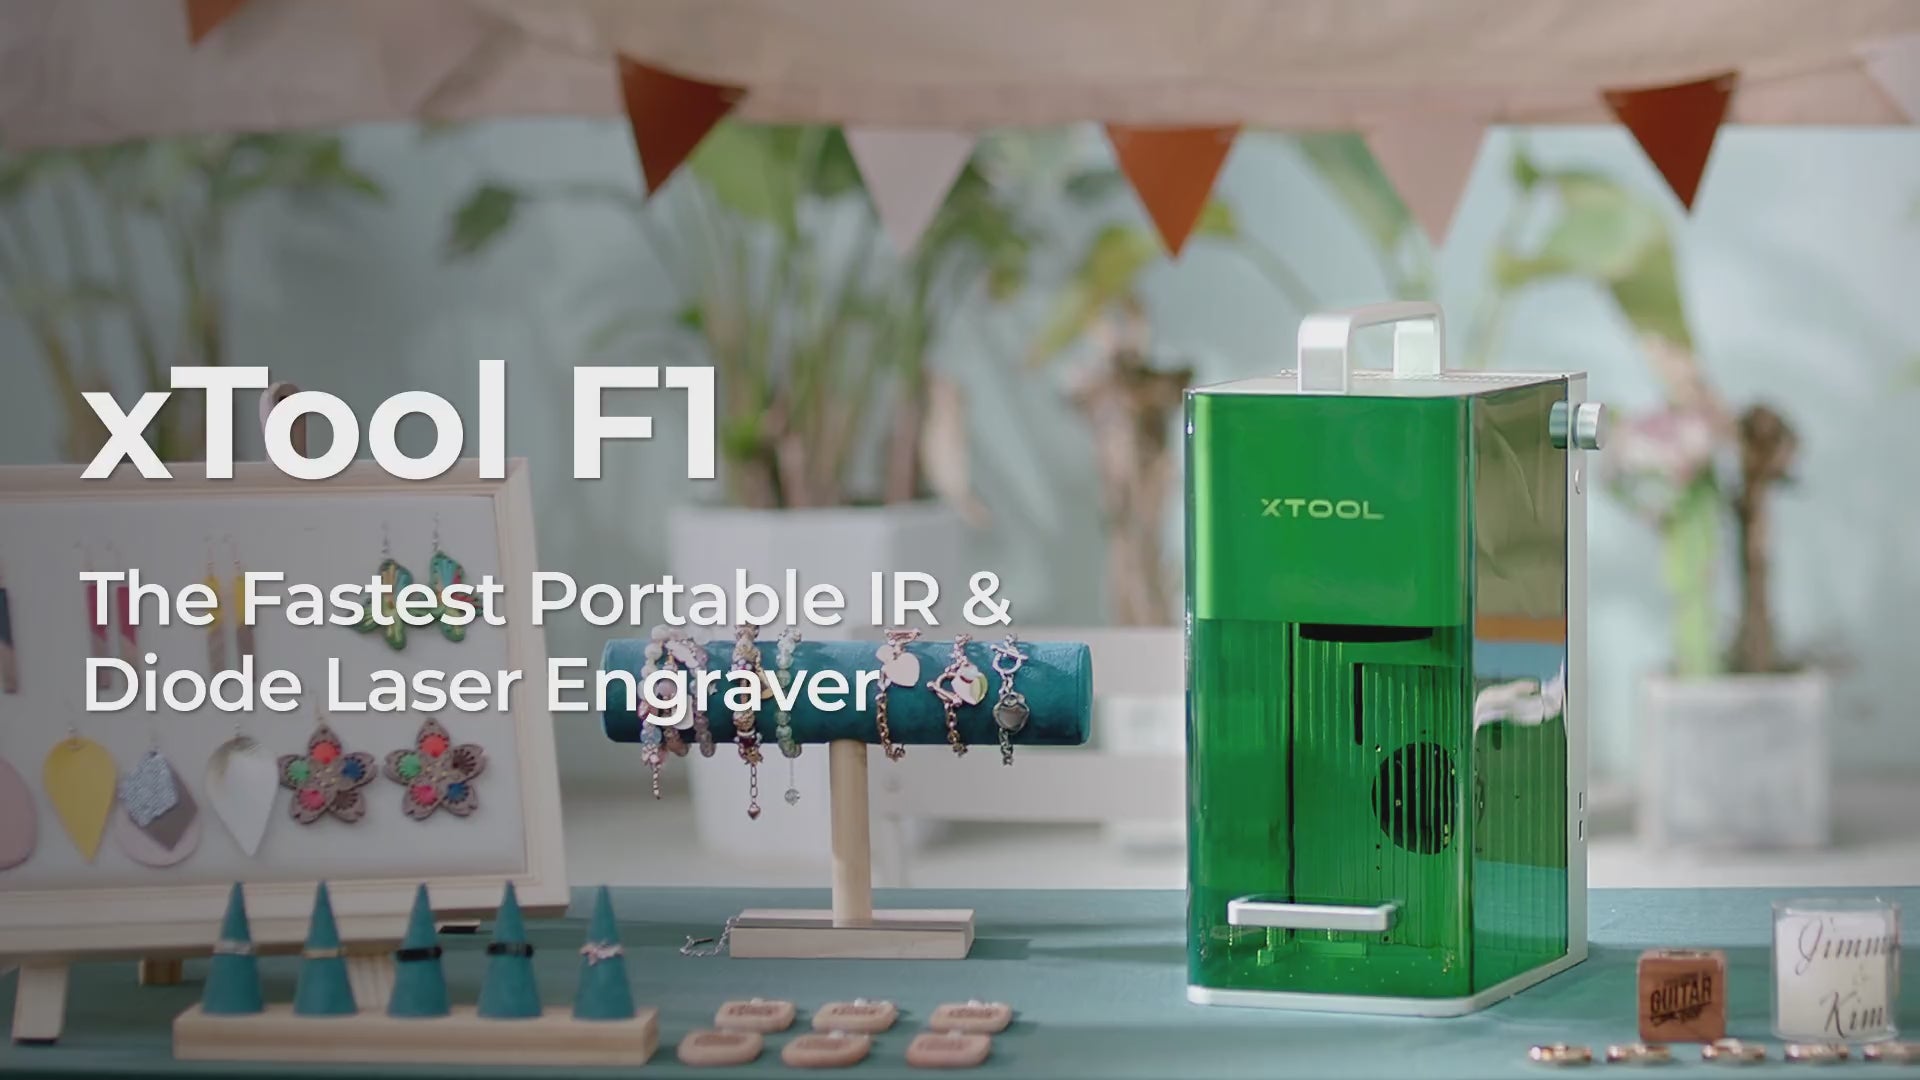 xTool F1 Laser: Crazy Fast, Small Business Potential, Portable, More  Materials, Super Intuitive 